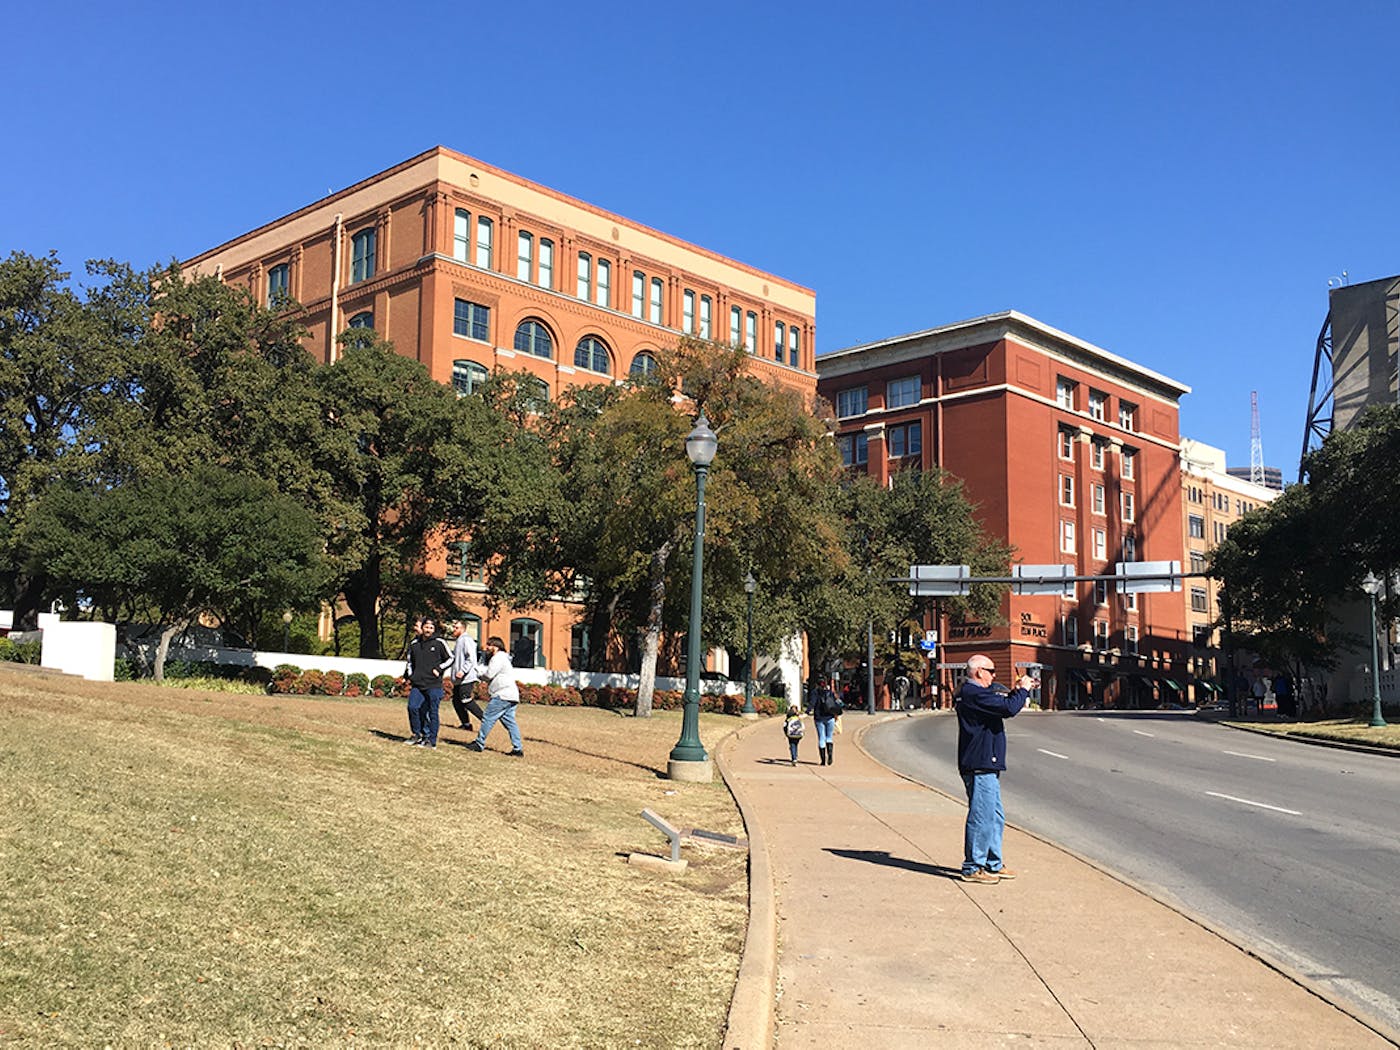 JFK Assassination Relics And Grassy Knoll Fence Items Up For Auction